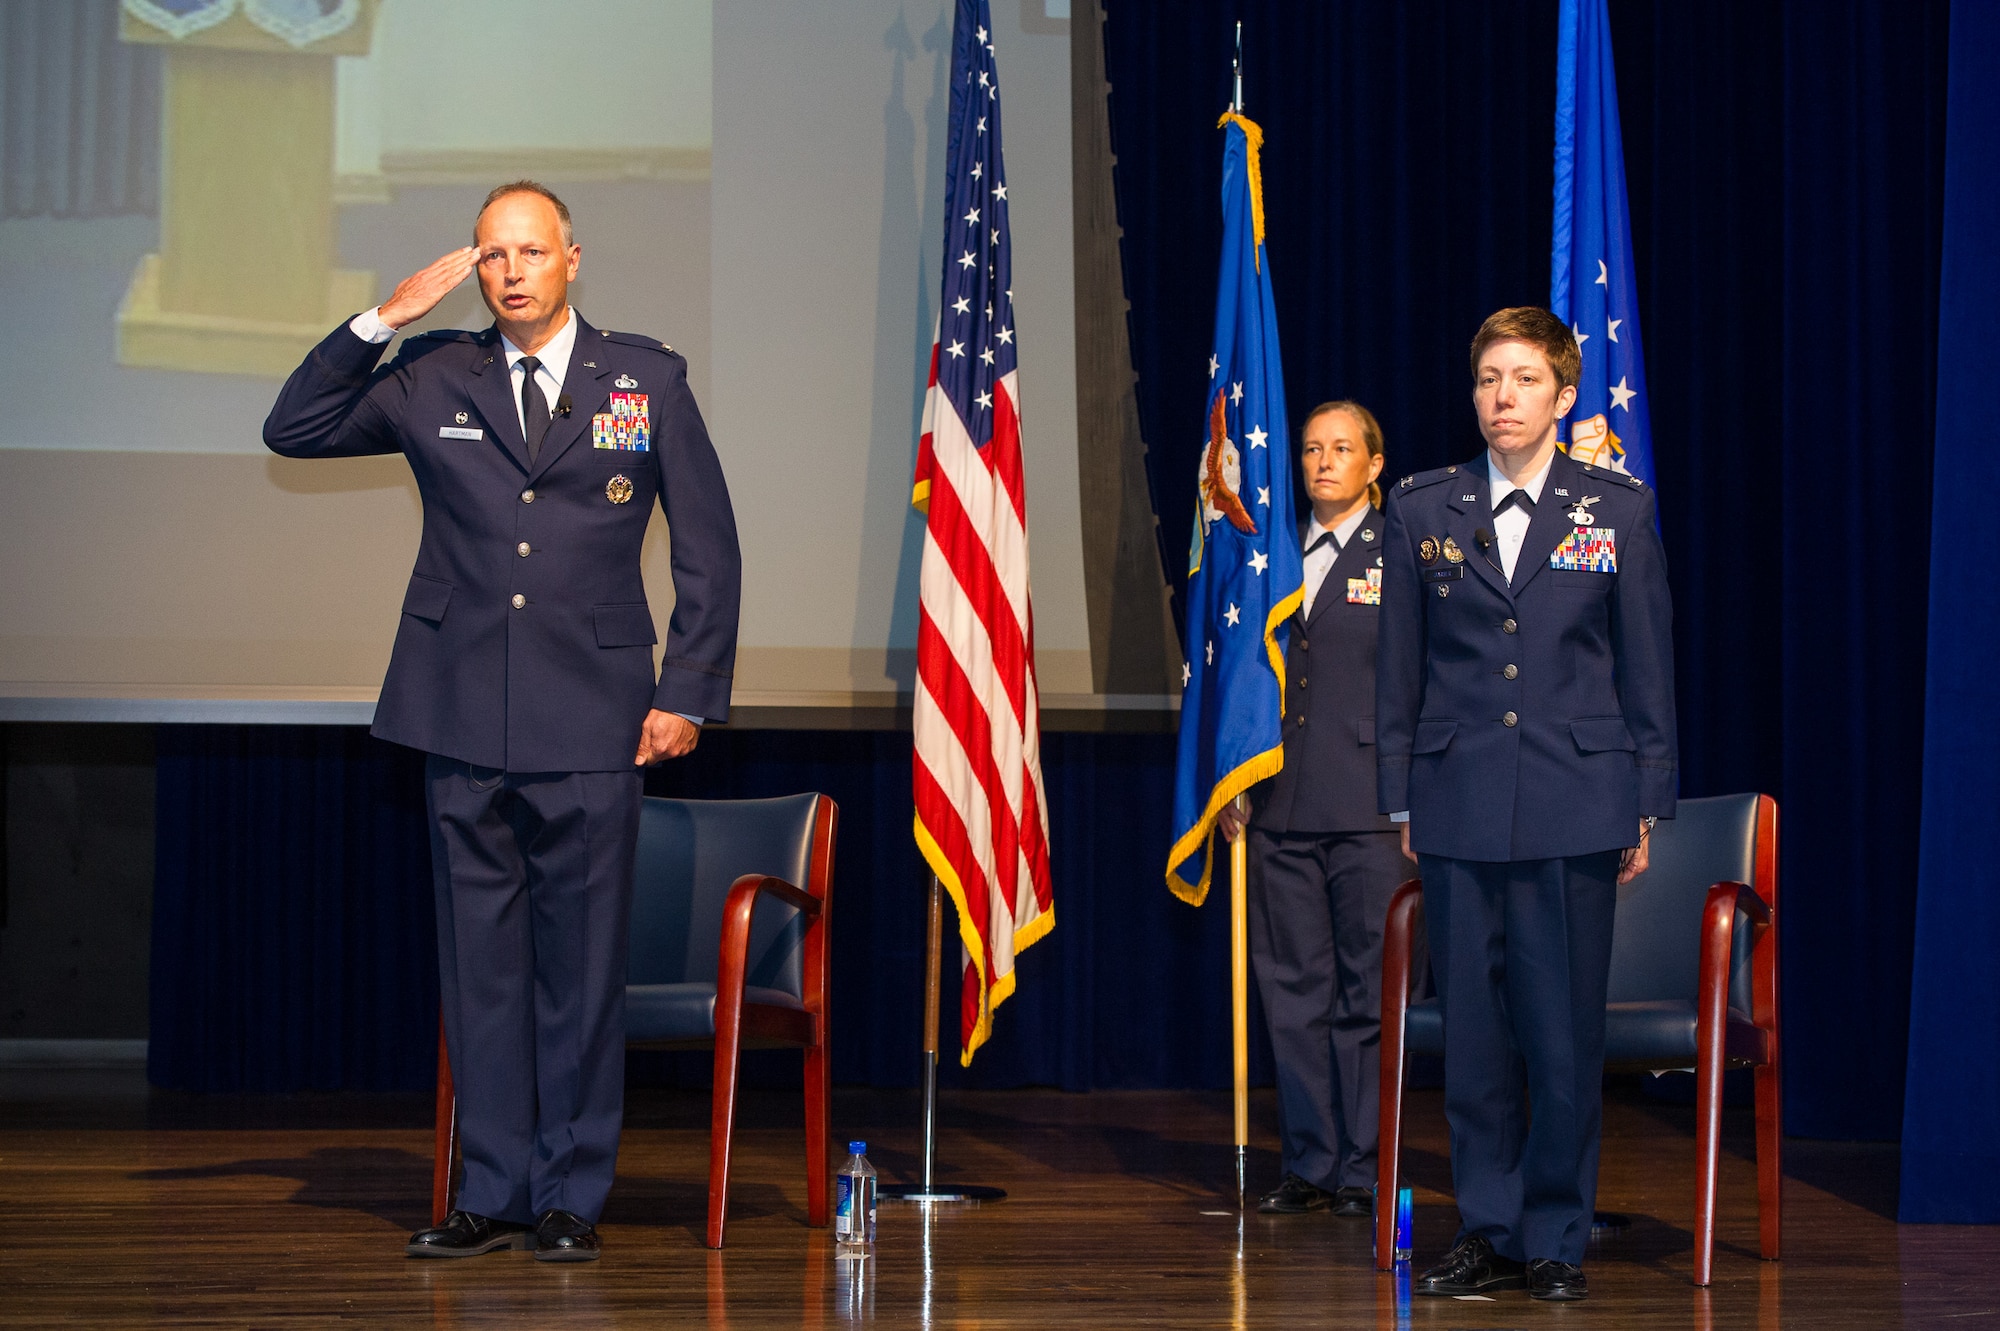 Col. Chad Hartman (left), commander of the Air Force Technical Applications Center, Patrick AFB, Fla., salutes and relinquishes command during a Change of Command ceremony June 30, 2020 as his replacement, Col. Katharine Barber (right) stands at attention.  Also pictured is guidon bearer Chief Master Sgt. Amy Long (center), AFTAC’s command chief.  (U.S. Air Force photo by Amanda Ryrholm)